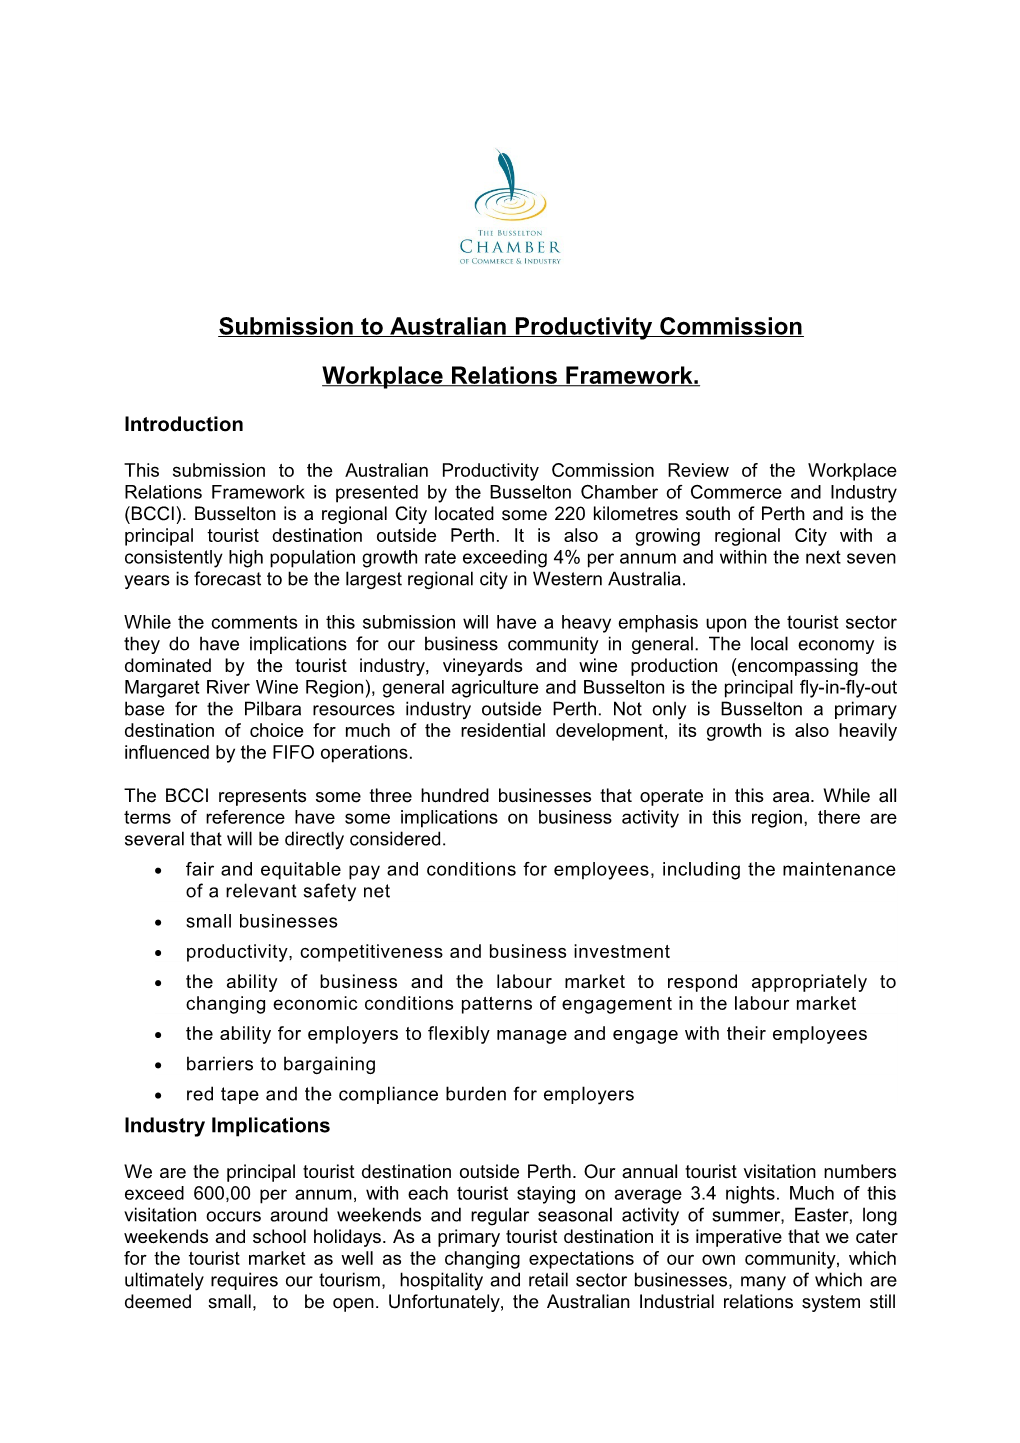 Submission 65 - Busselton Chamber of Commerce and Industry - Workplace Relations Framework